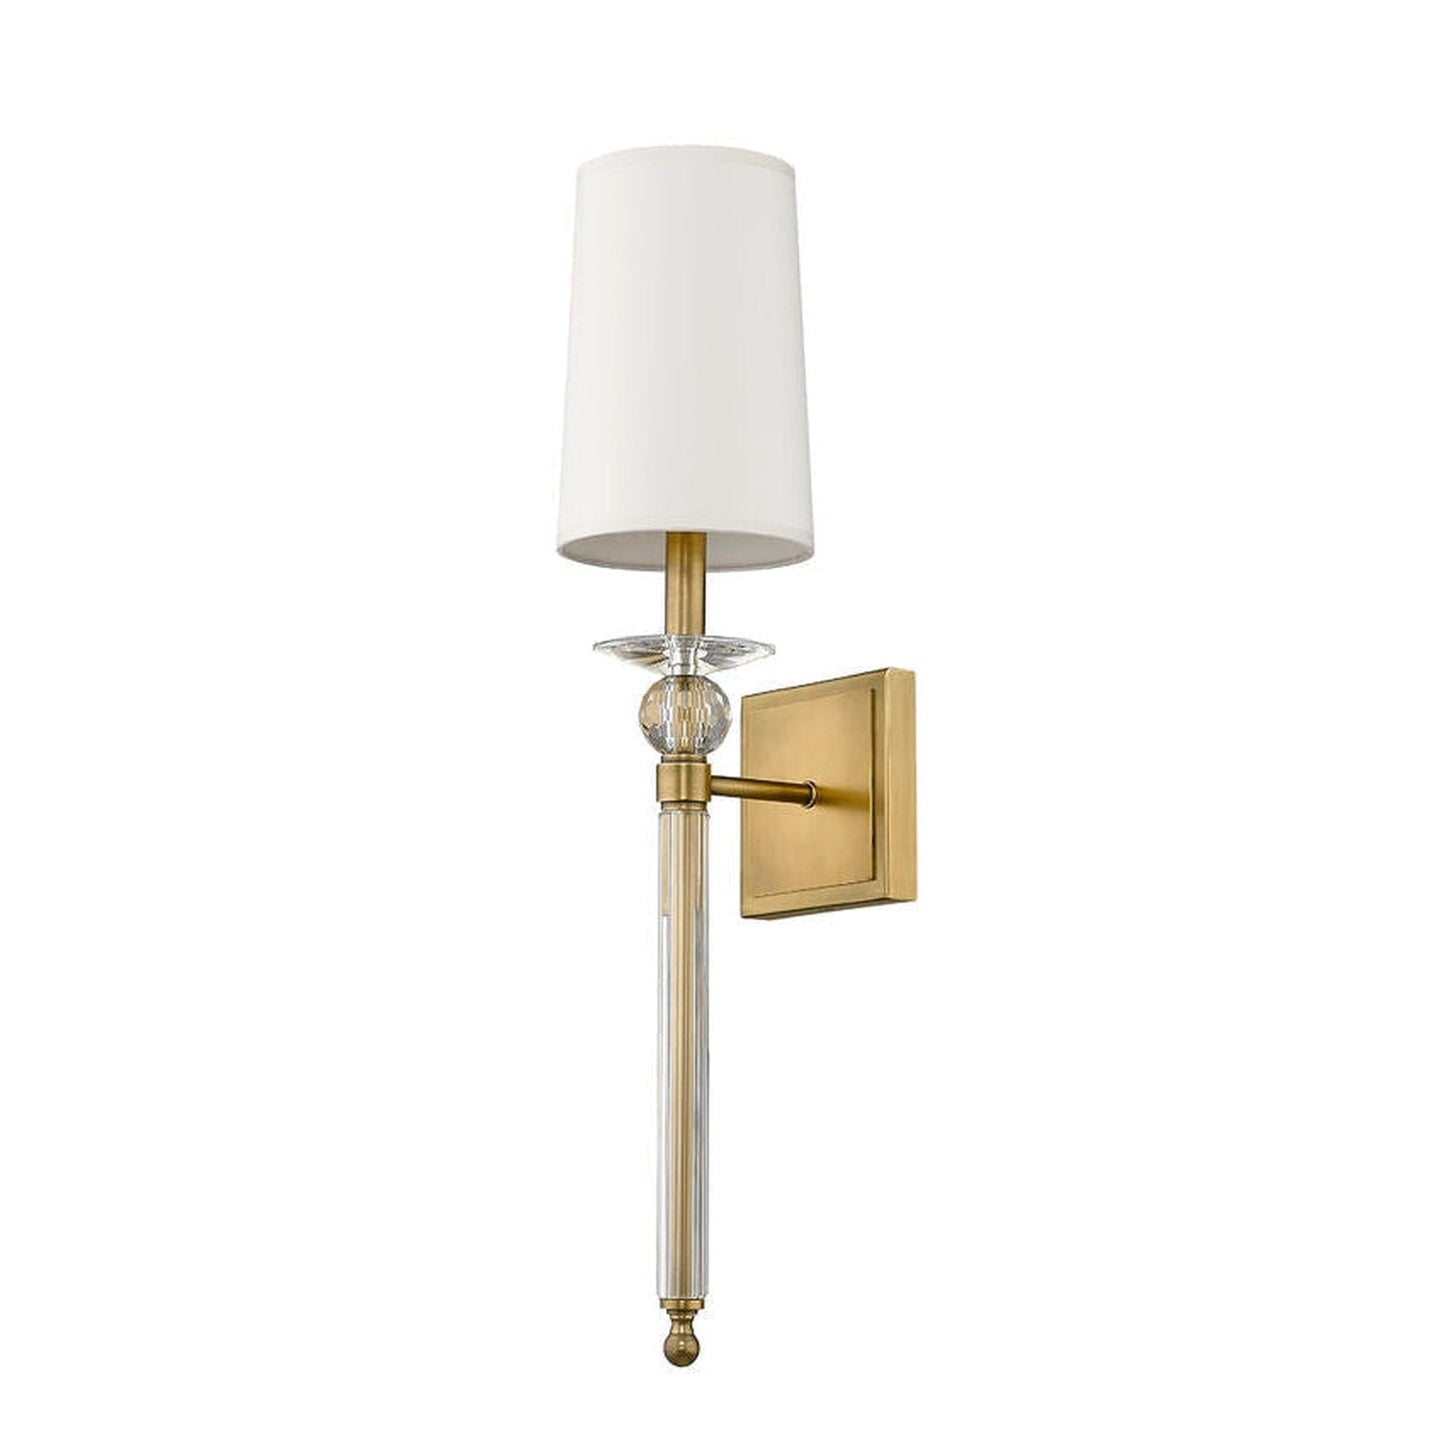 Z-Lite Ava 6" 1-Light Rubbed Brass Wall Sconce With Beige Parchment Paper Shade